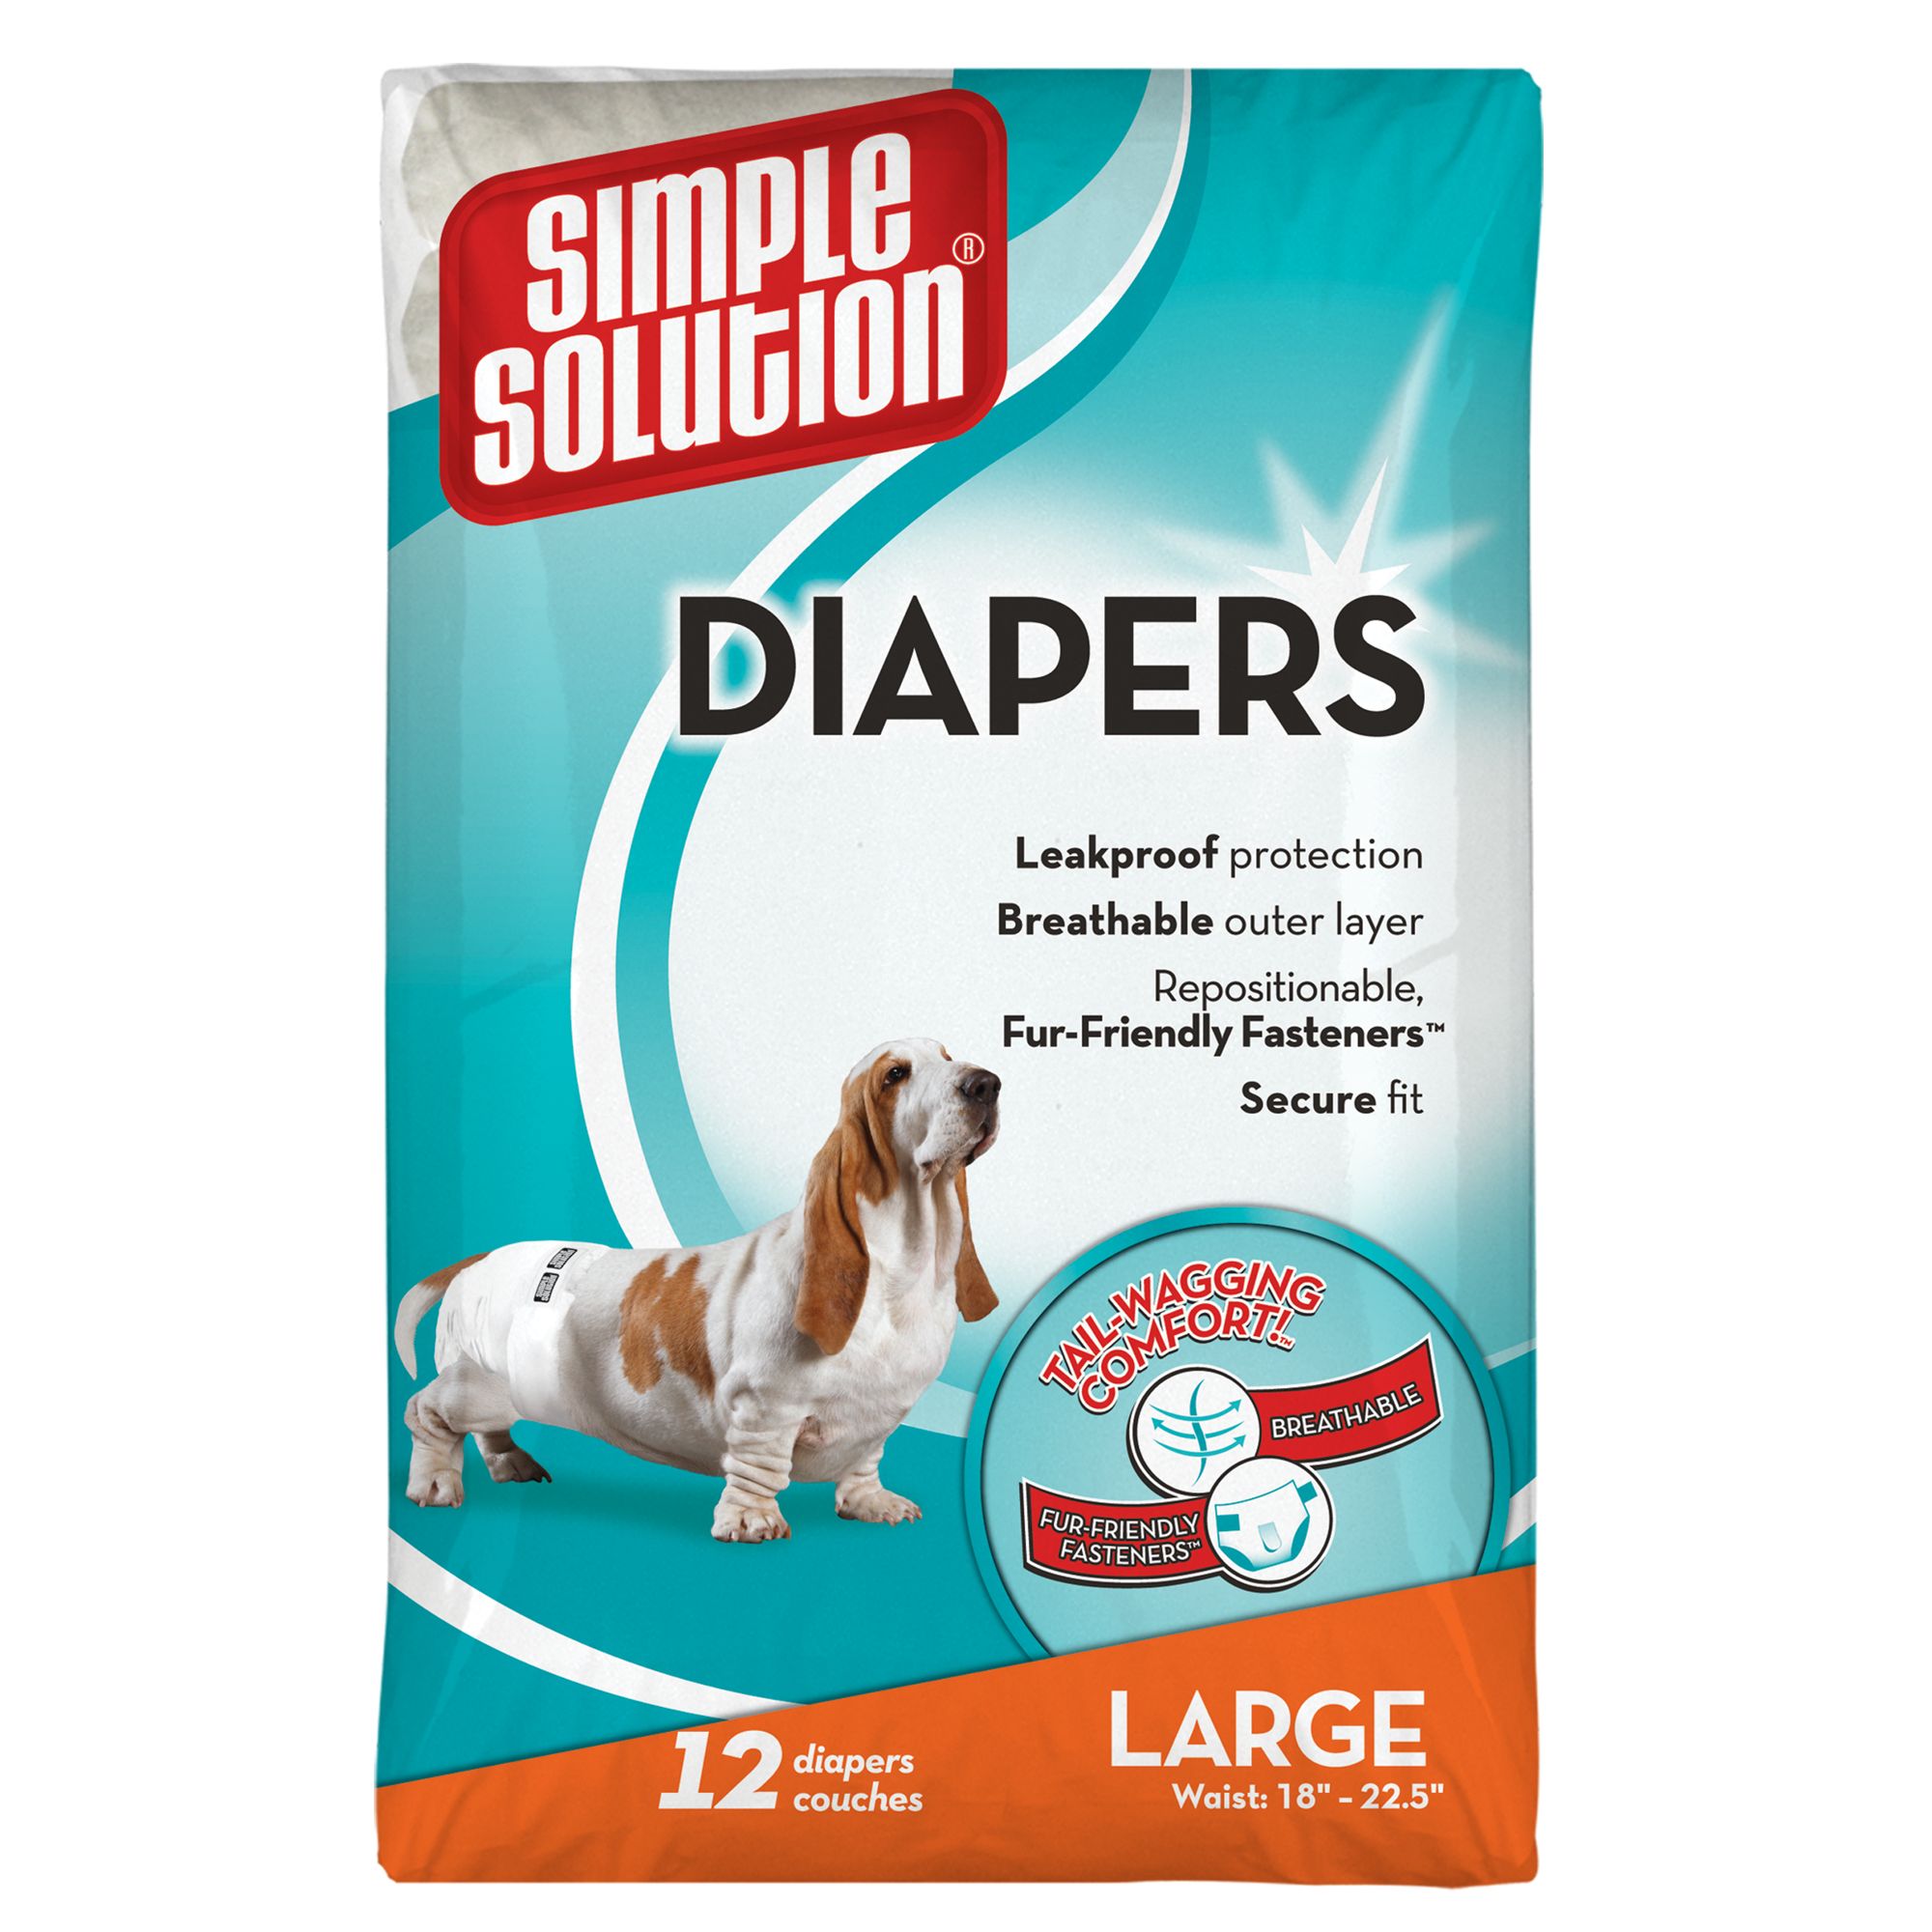 dog period diapers